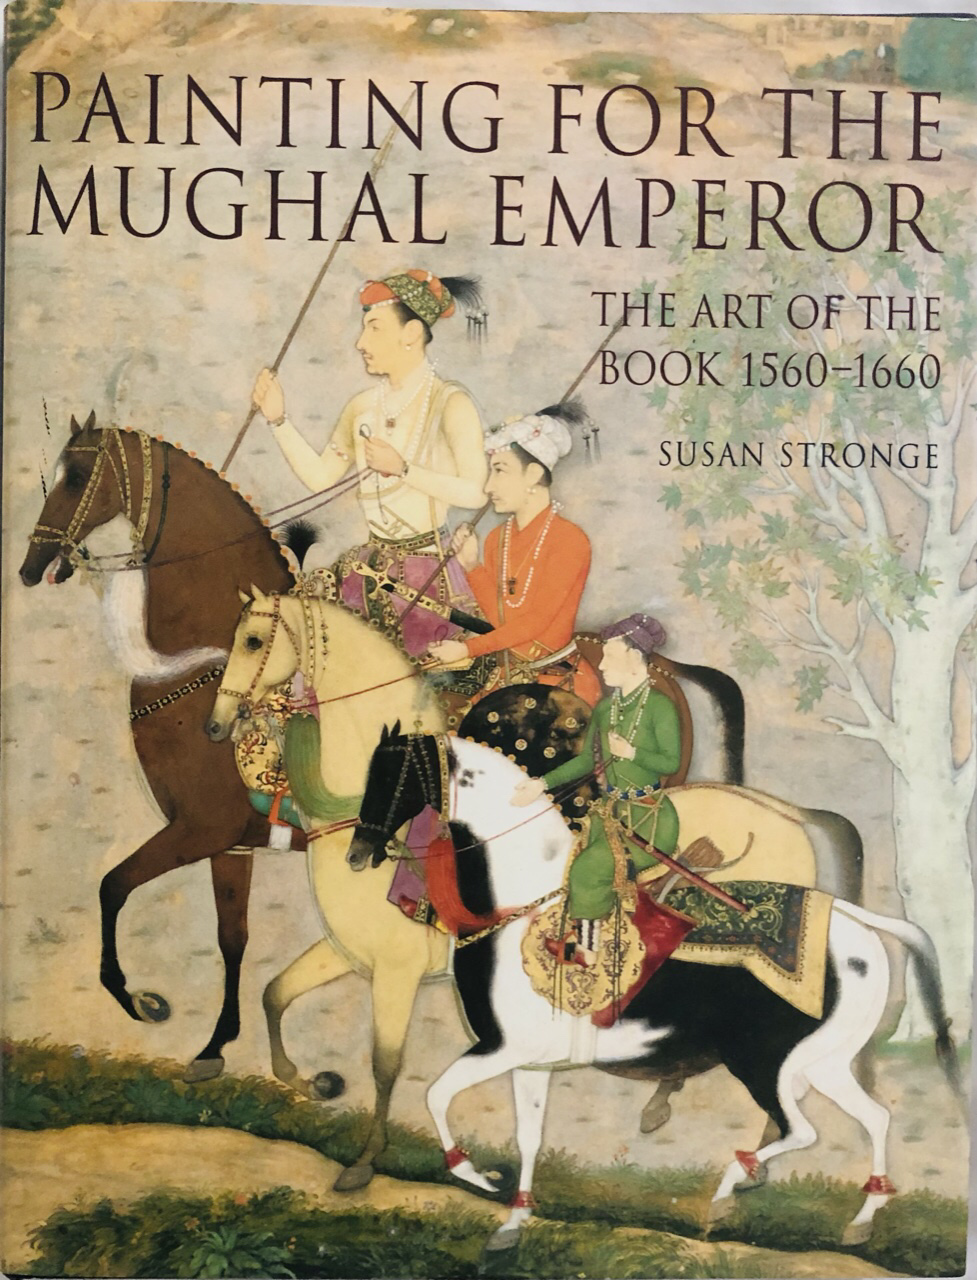 Painting for the Mughal Emperor: The Art of the Book 1560-1660 - Susan Stronge